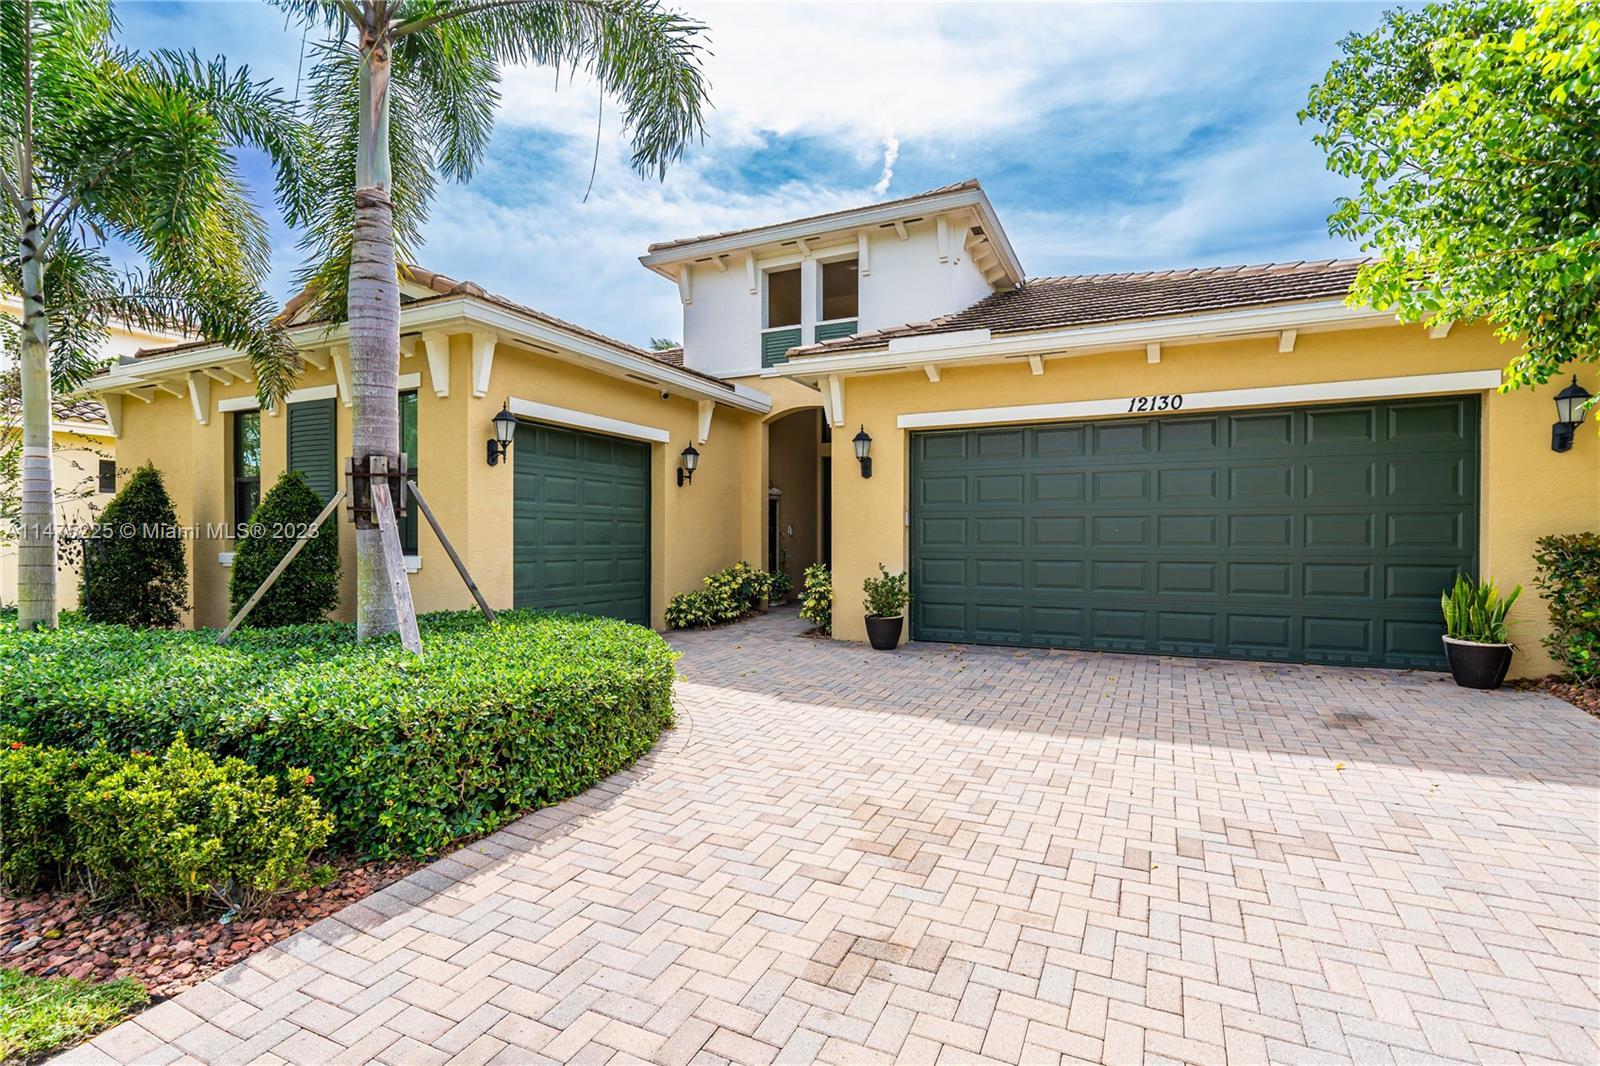 "Rarely available oasis in the Heart of Boca Raton". Exclusive private gated community. 4 bedroom 3 